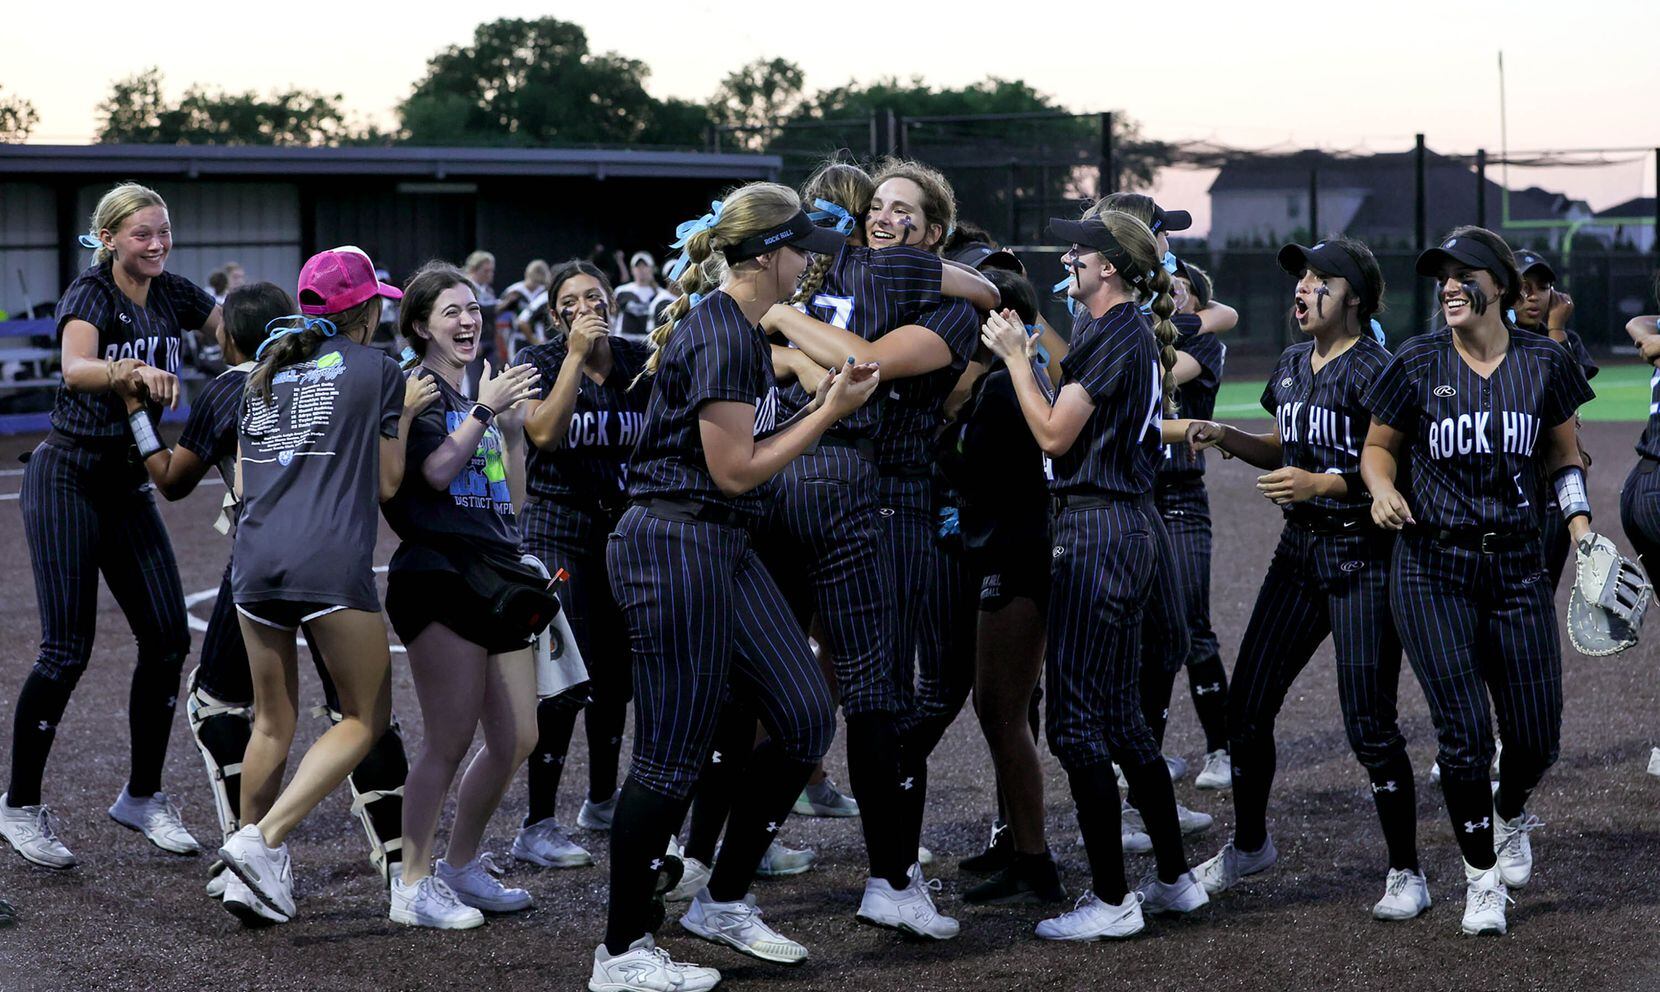 Prosper Rock Hill celebrate their victory over Royce City, 1-0 in game 2 of the 5A Region II...